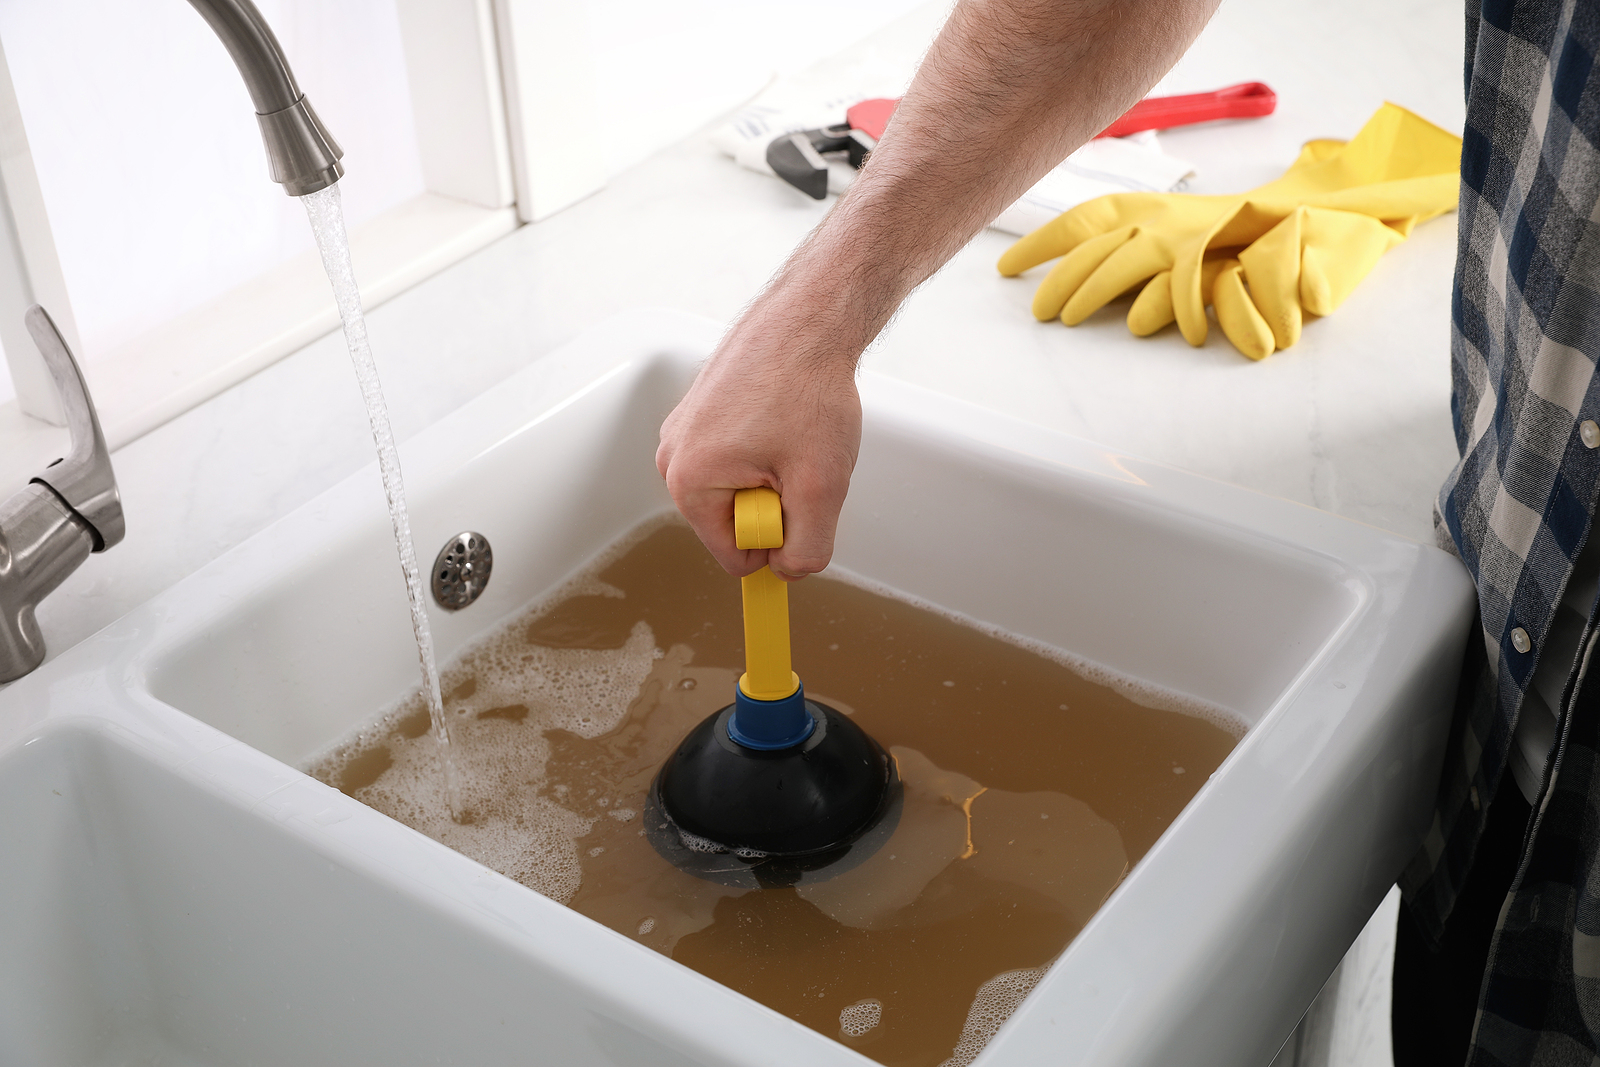 https://www.reicheltplumbing.com/wp-content/uploads/how-to-unclog-a-sink-drain-with-a-plumber%E2%80%99s-snake.jpg